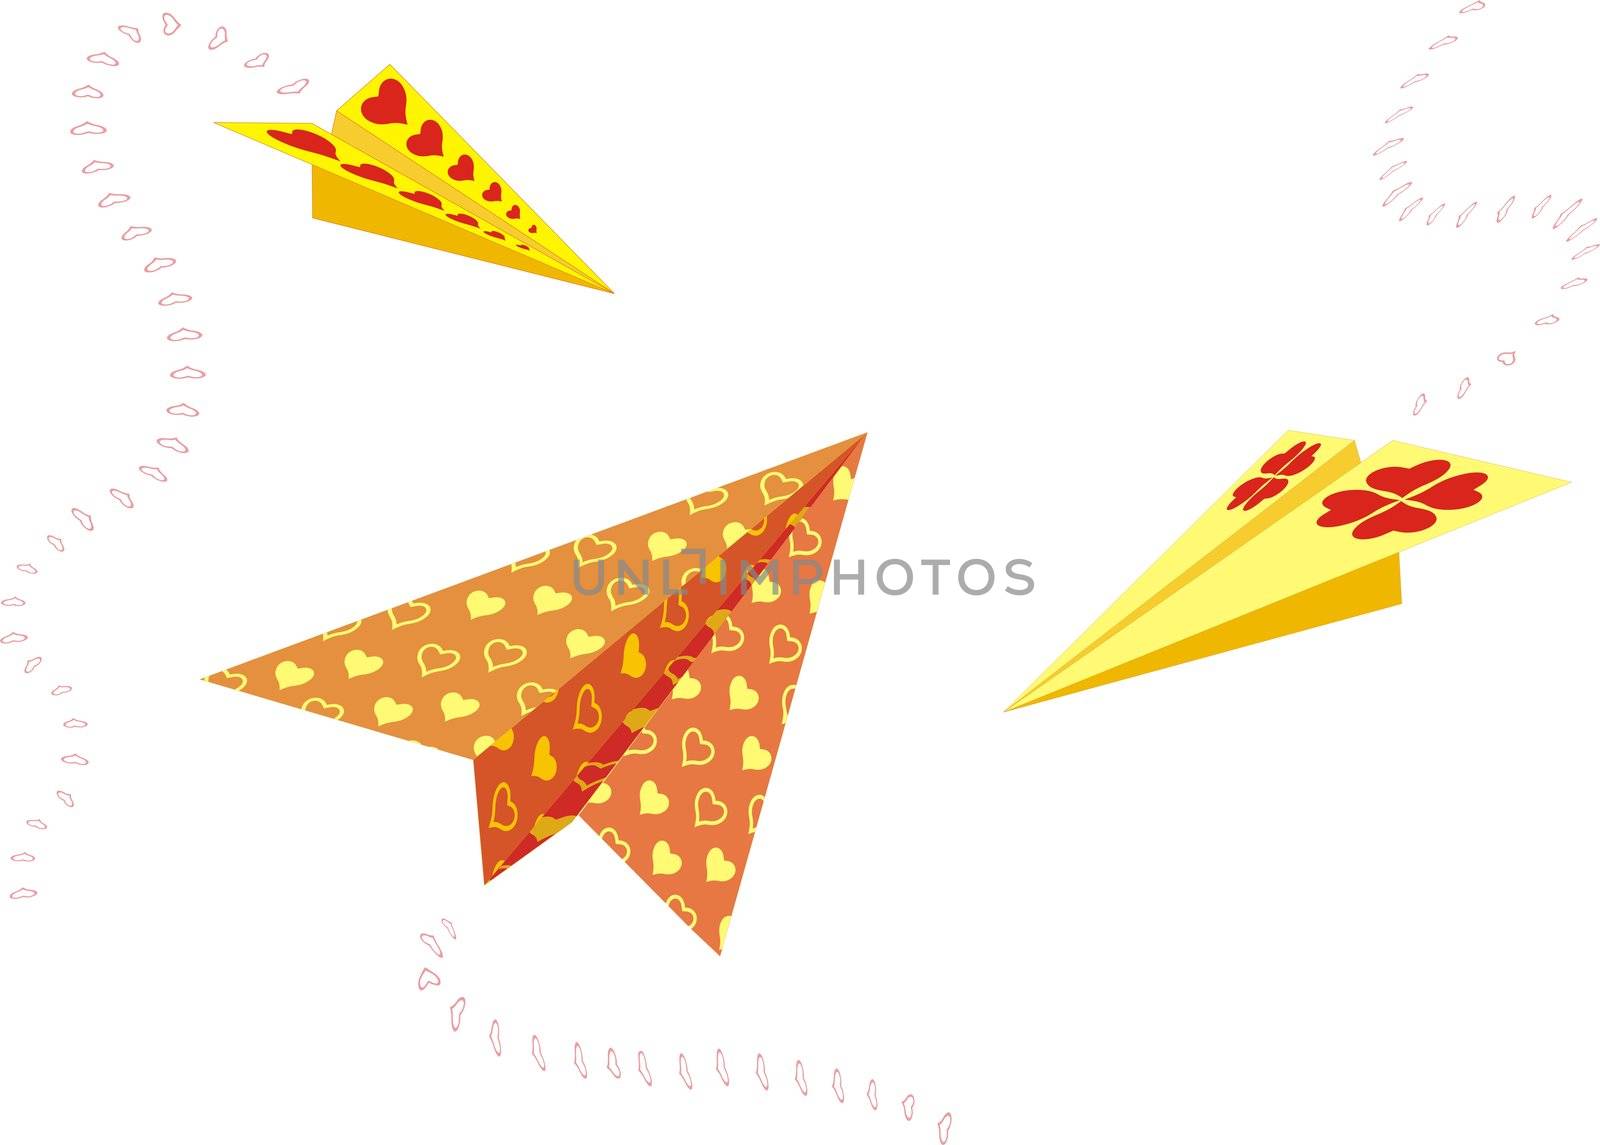 Paper planes sending greetings for valentines day, illustration